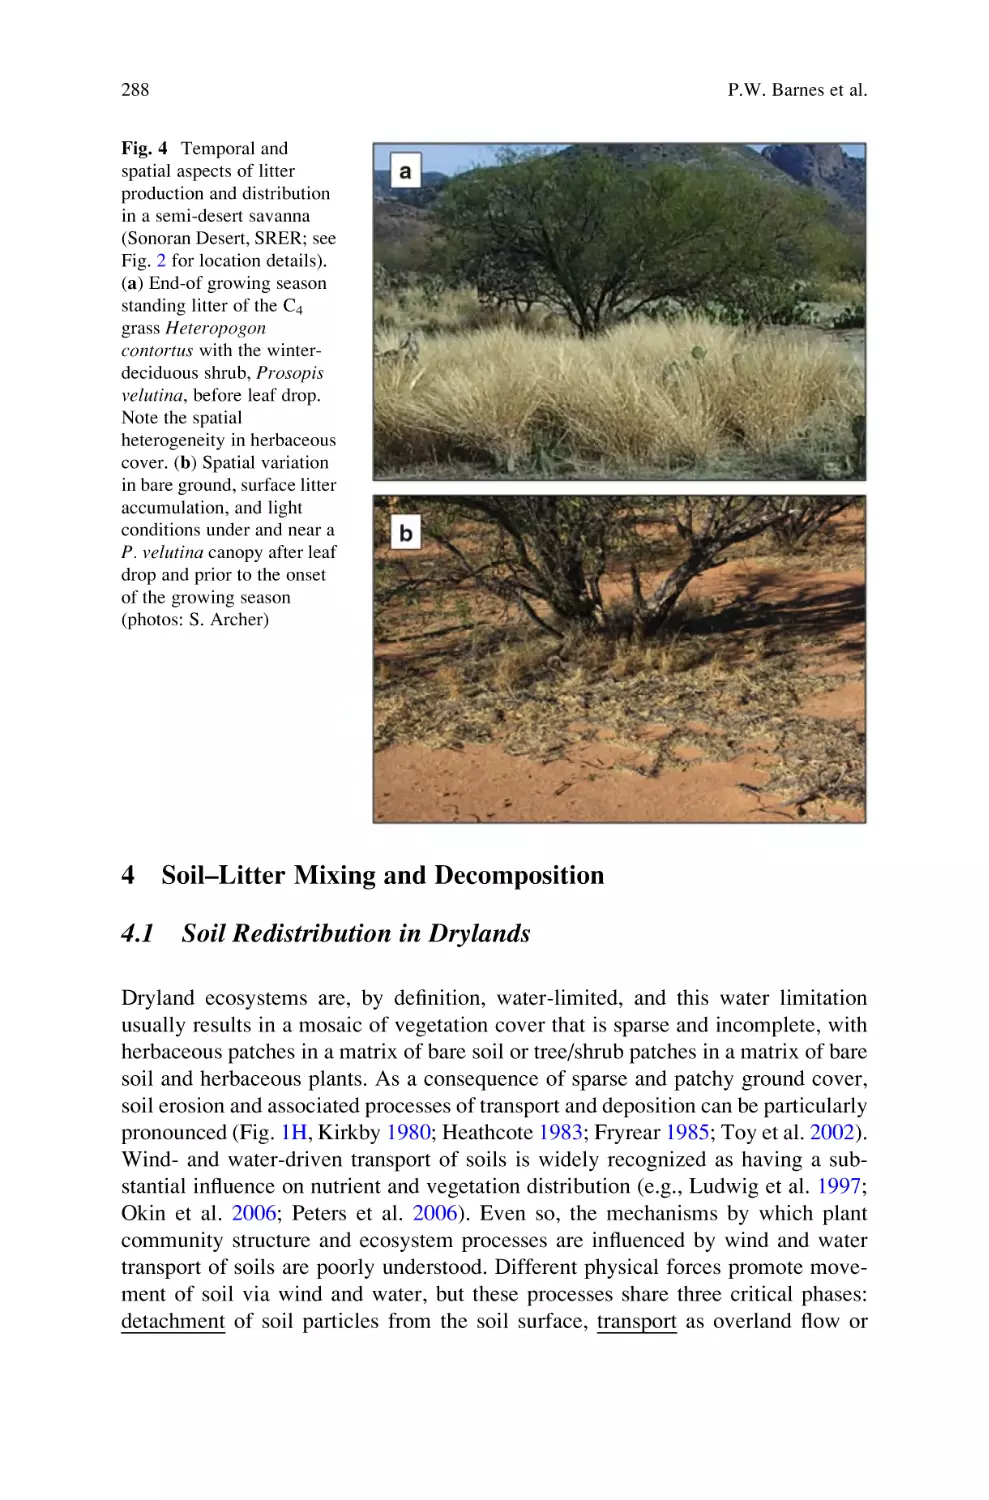 4 Soil-Litter Mixing and Decomposition
4.1 Soil Redistribution in Drylands